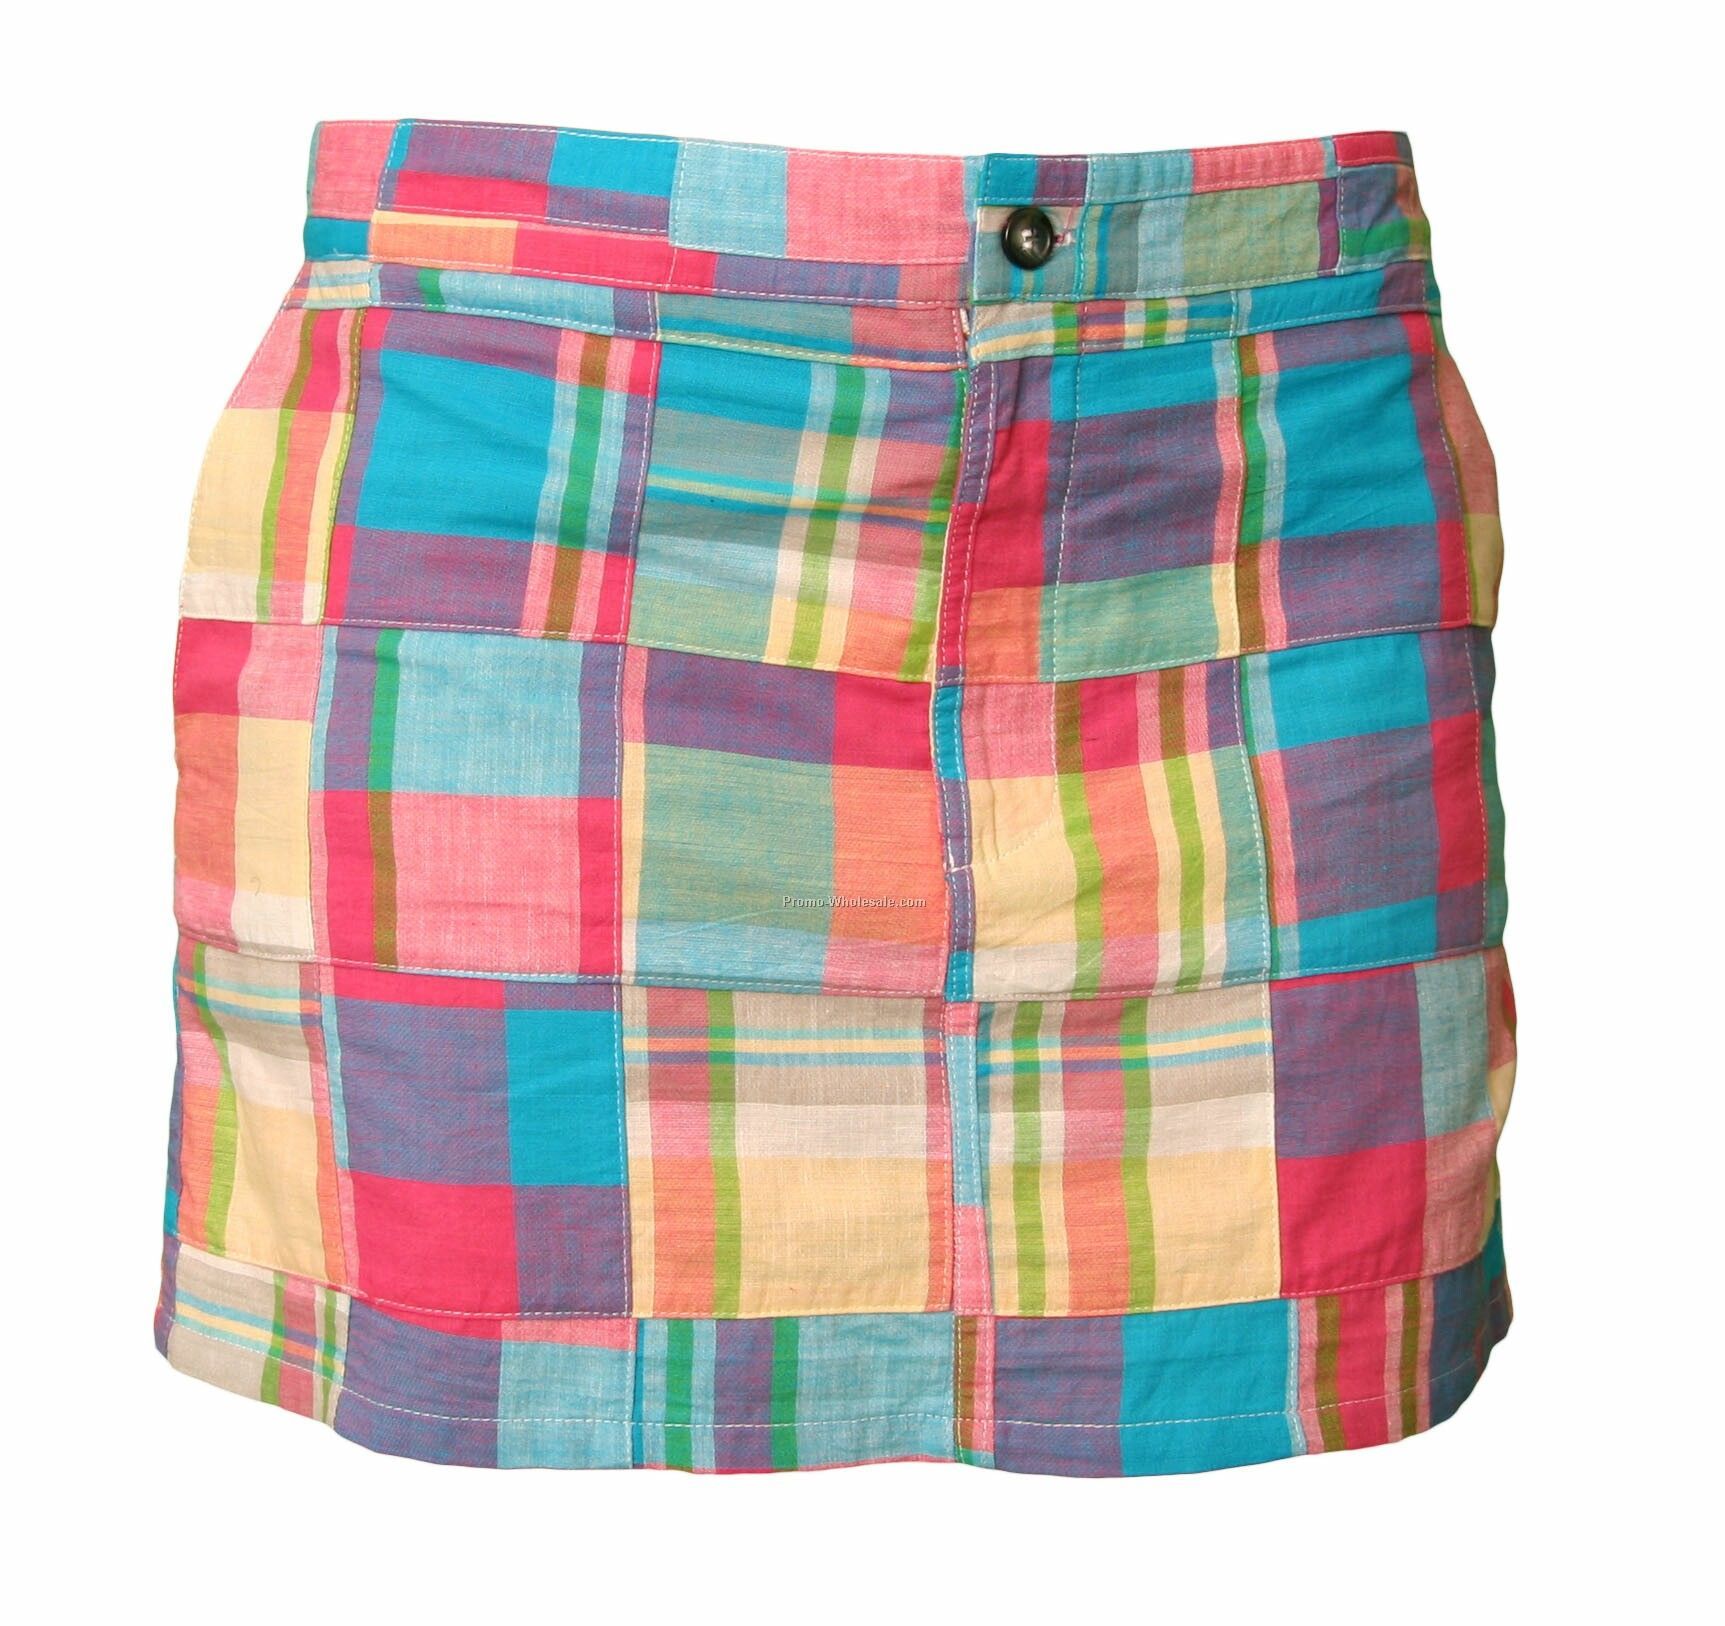 Adults' Spring Madras Low Rise Campus Skirt (Xs-xl)